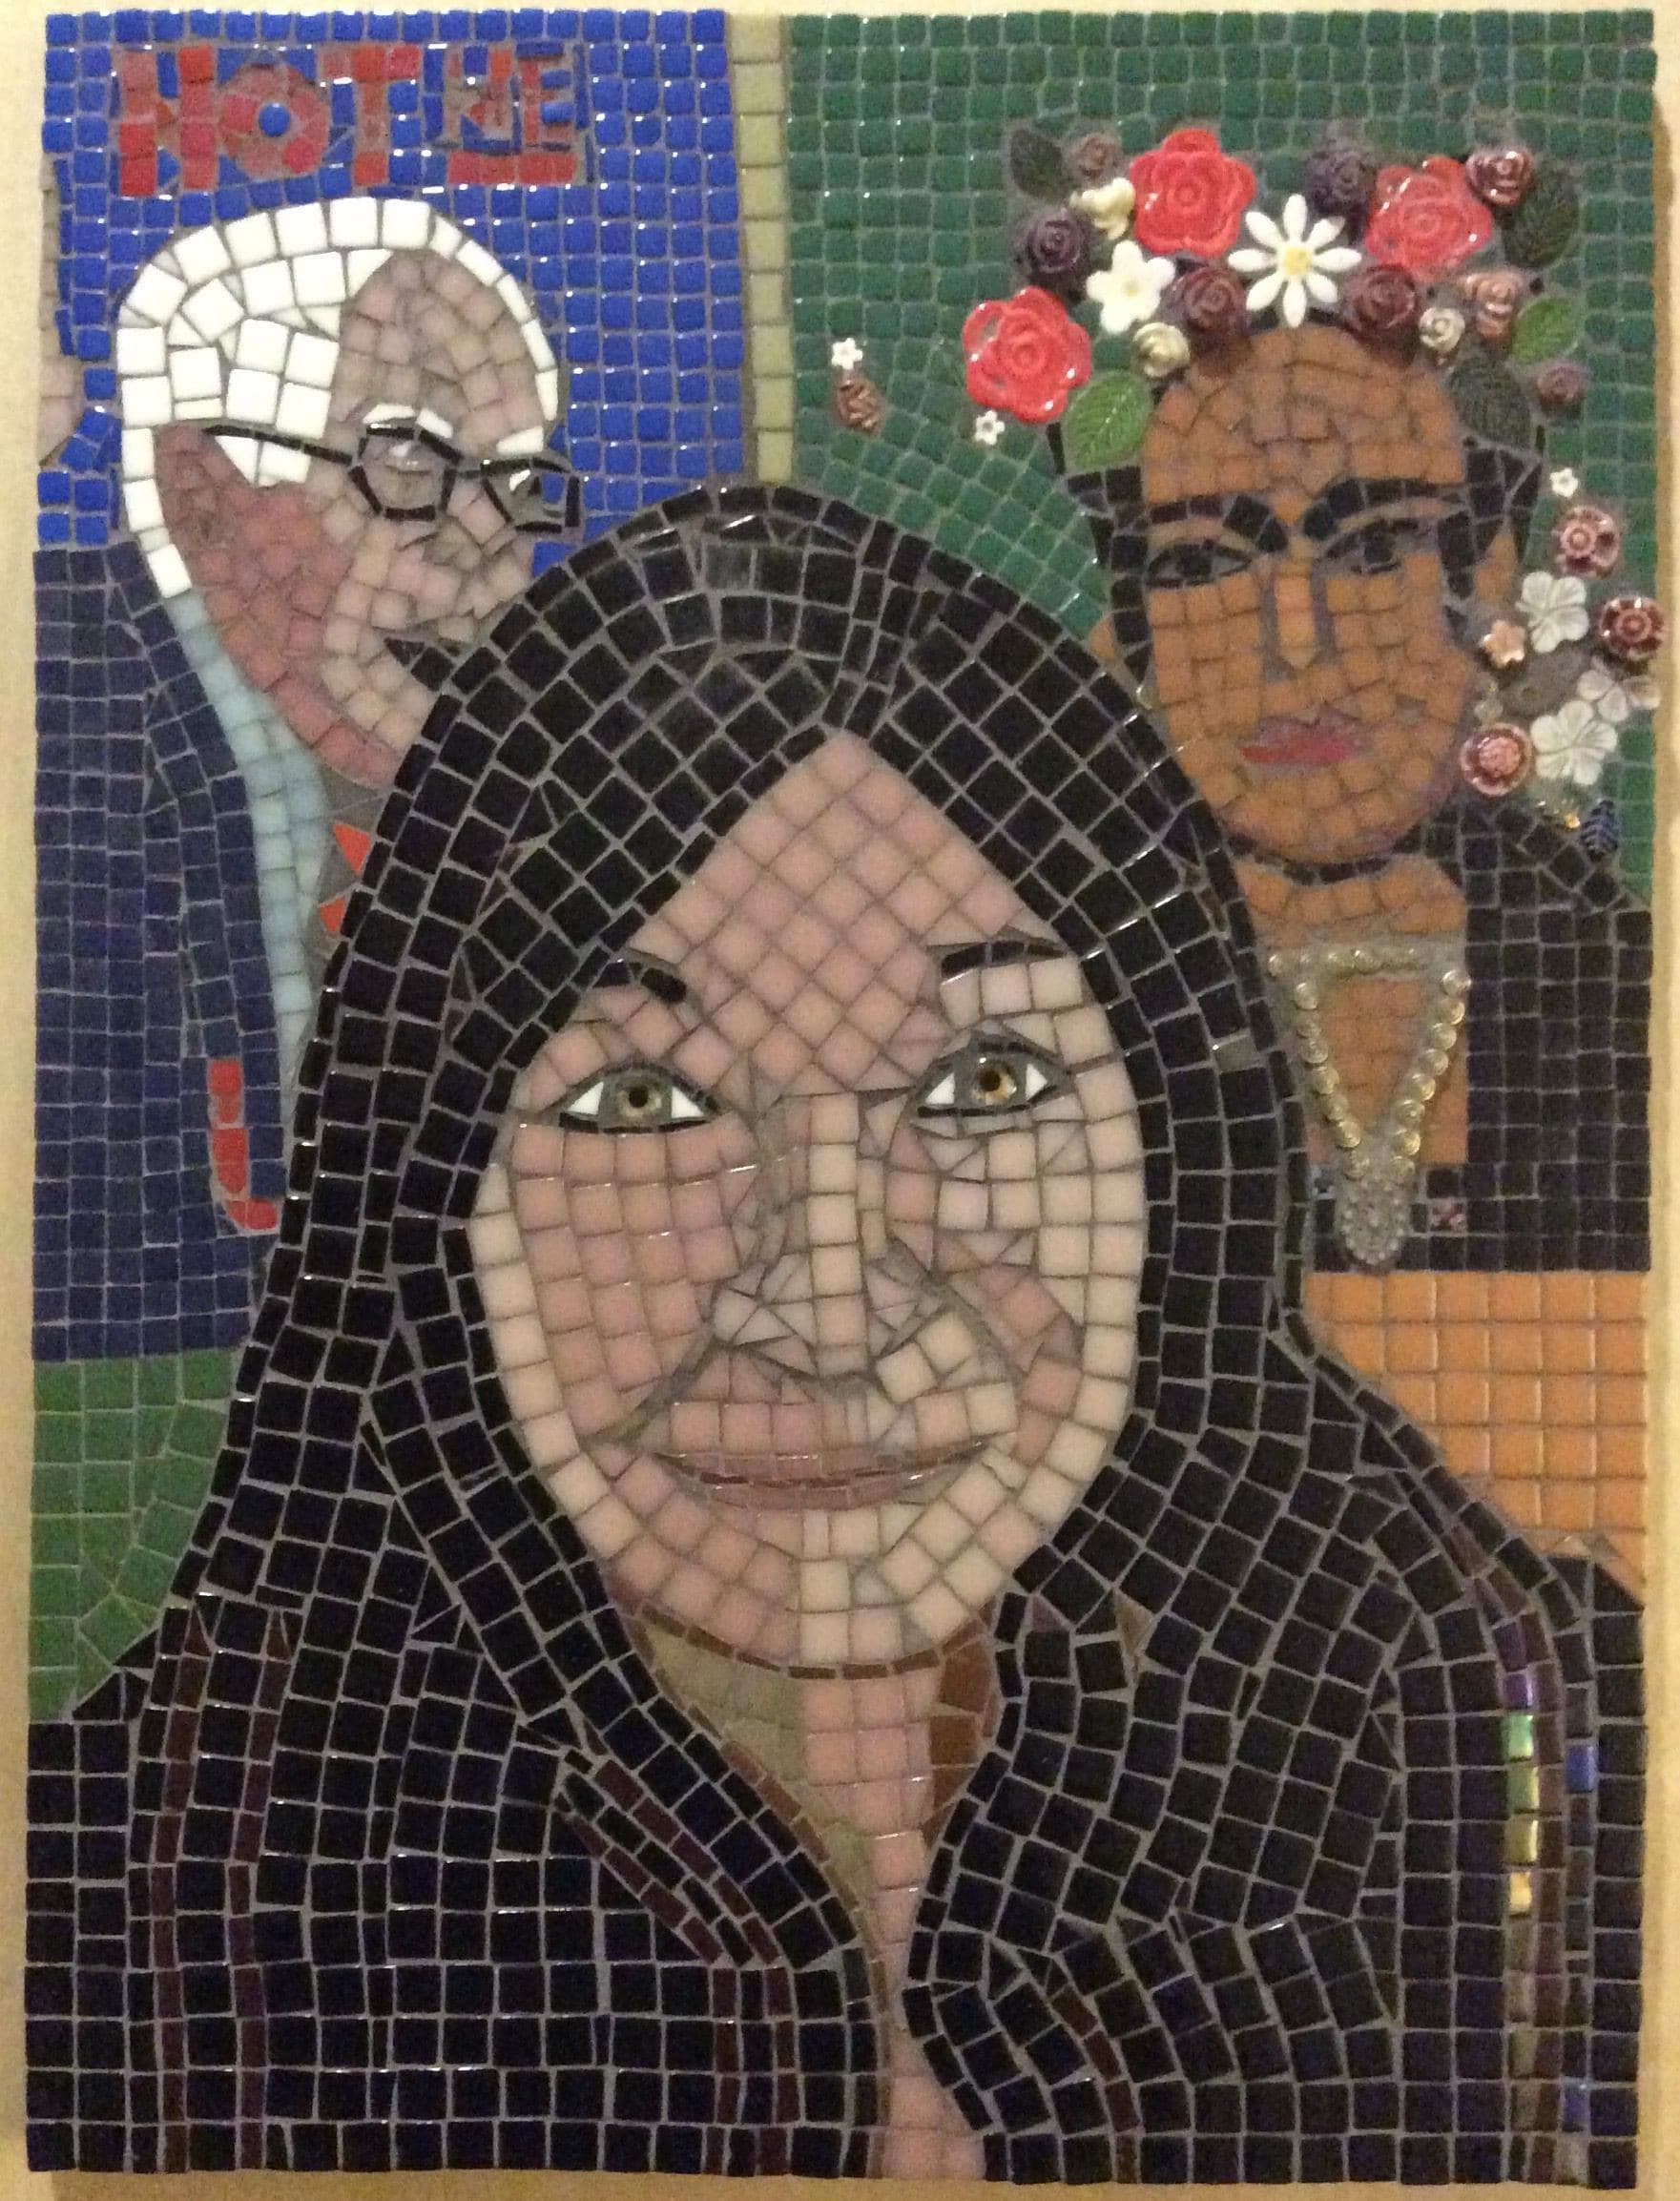 Yes, I am composed entirely of tiles.